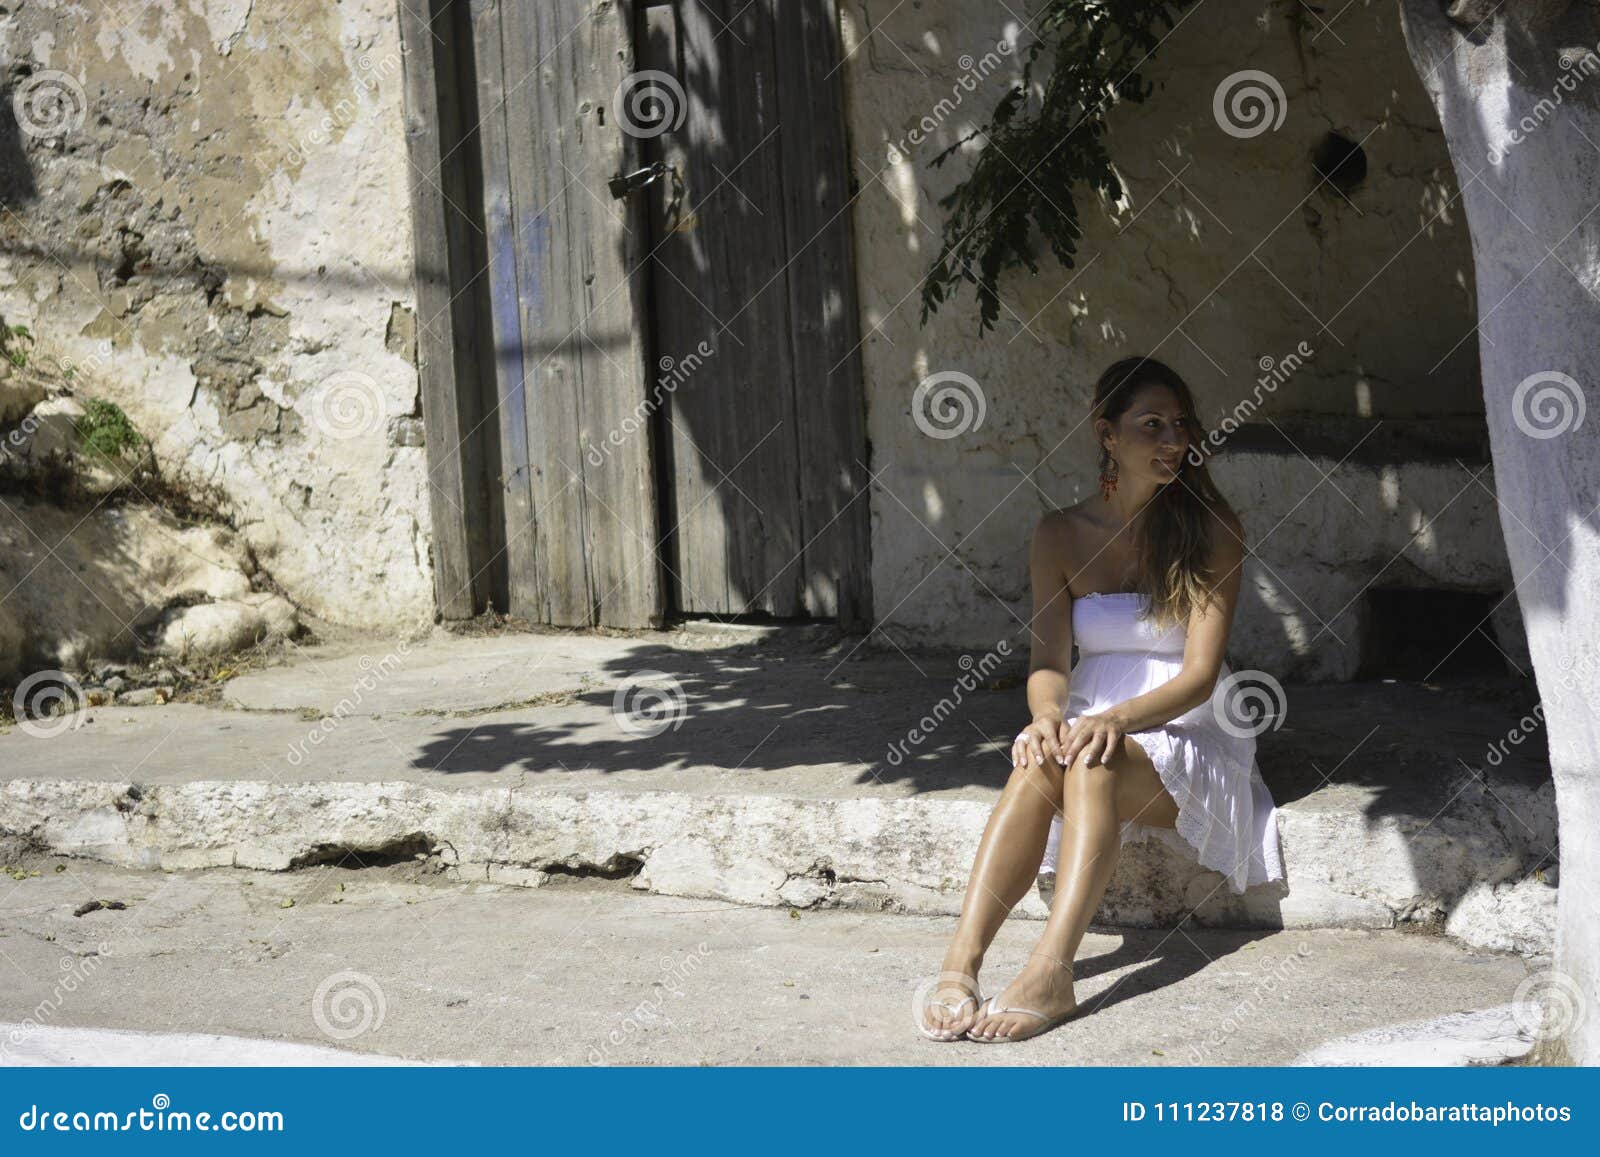 the woman sitting in the shade of a tree